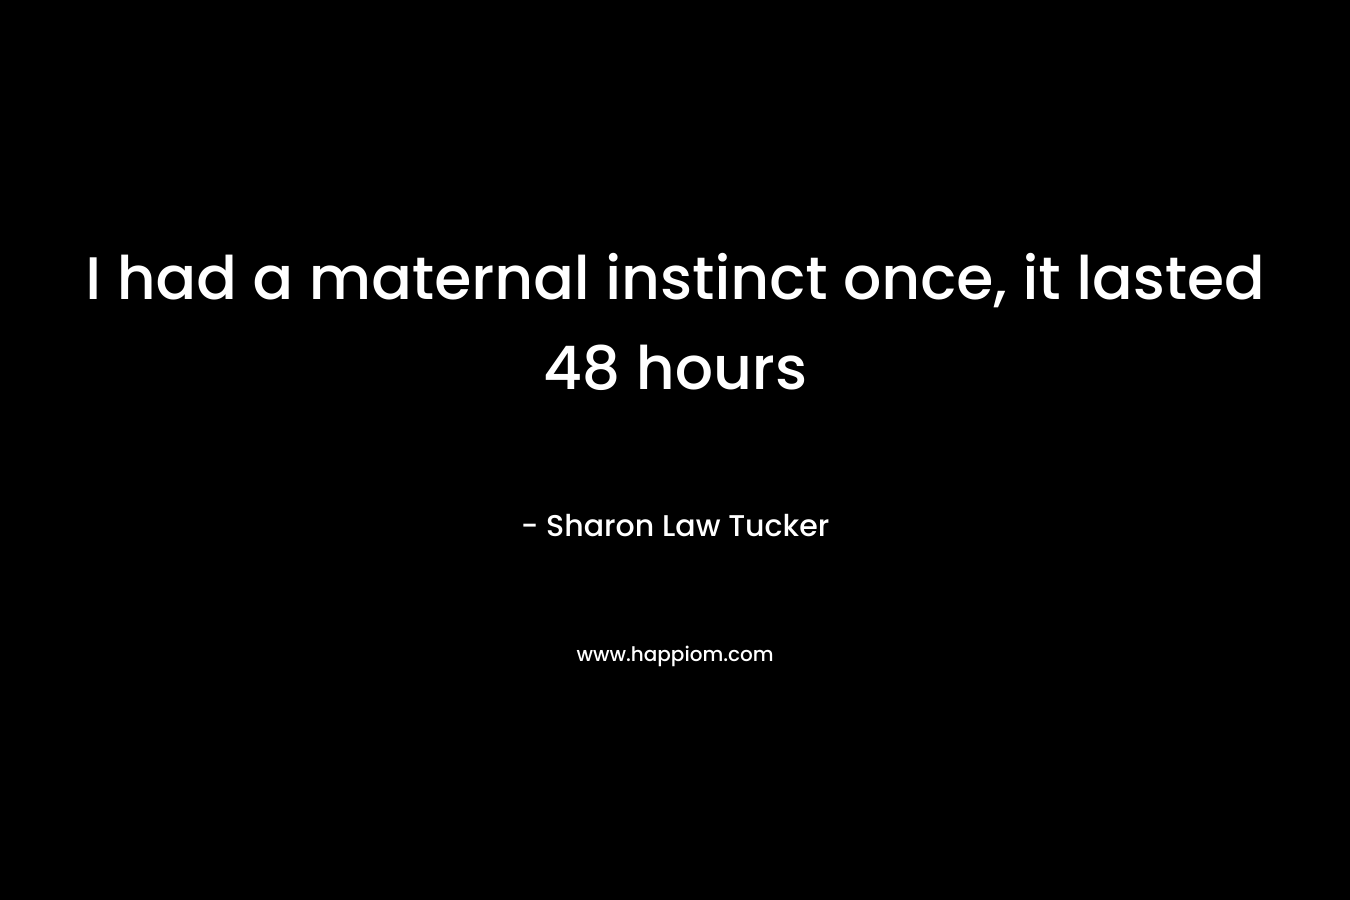 I had a maternal instinct once, it lasted 48 hours